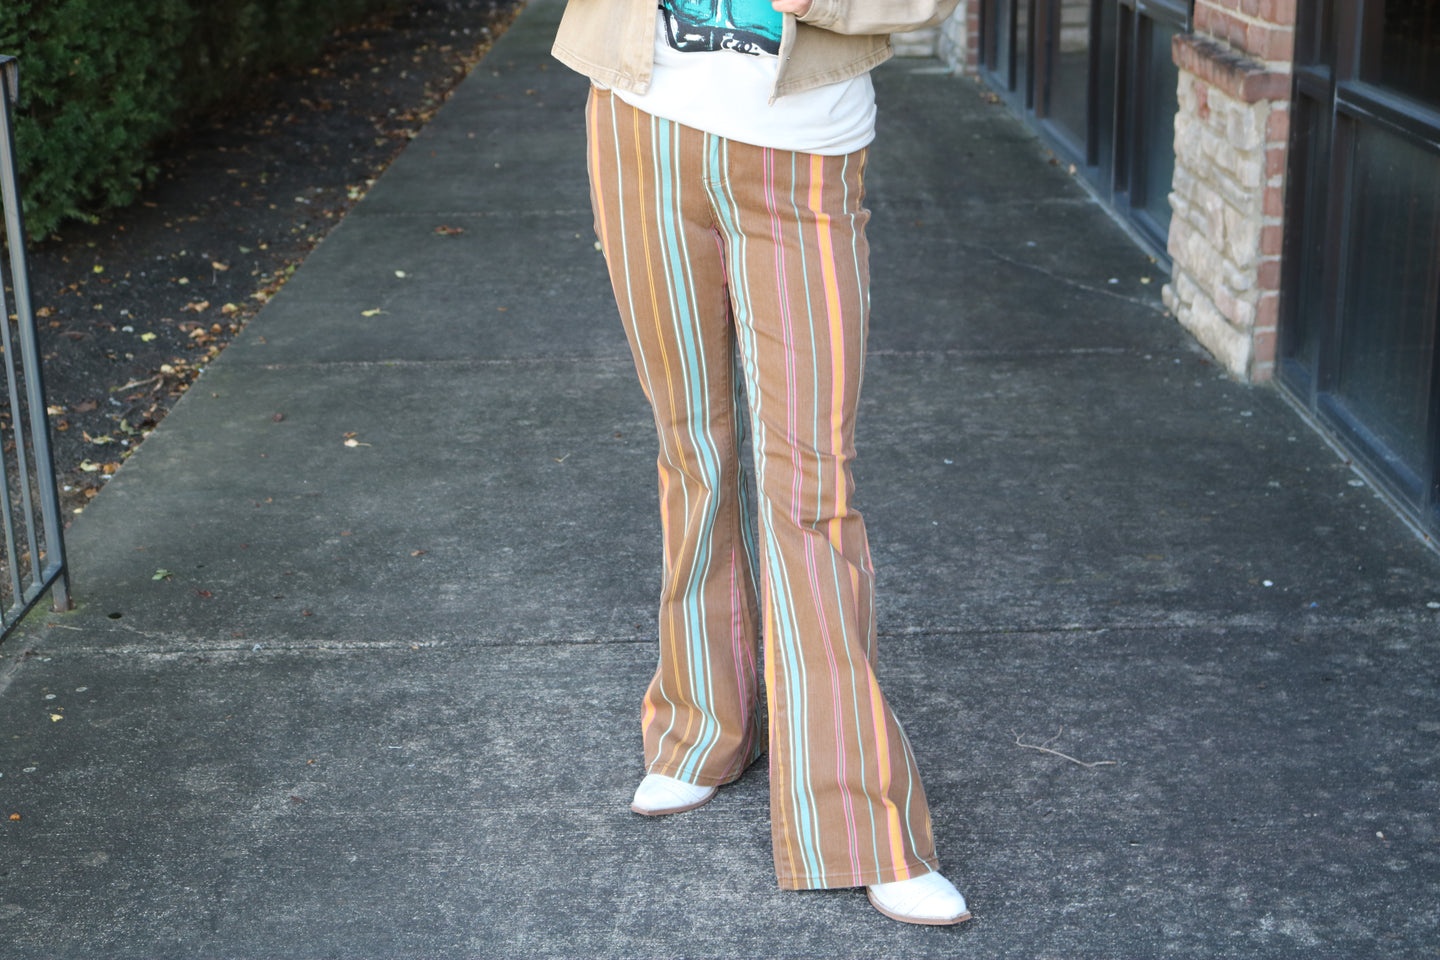 Brown flares anyone??  Brown flares, Flared pants outfit, Striped